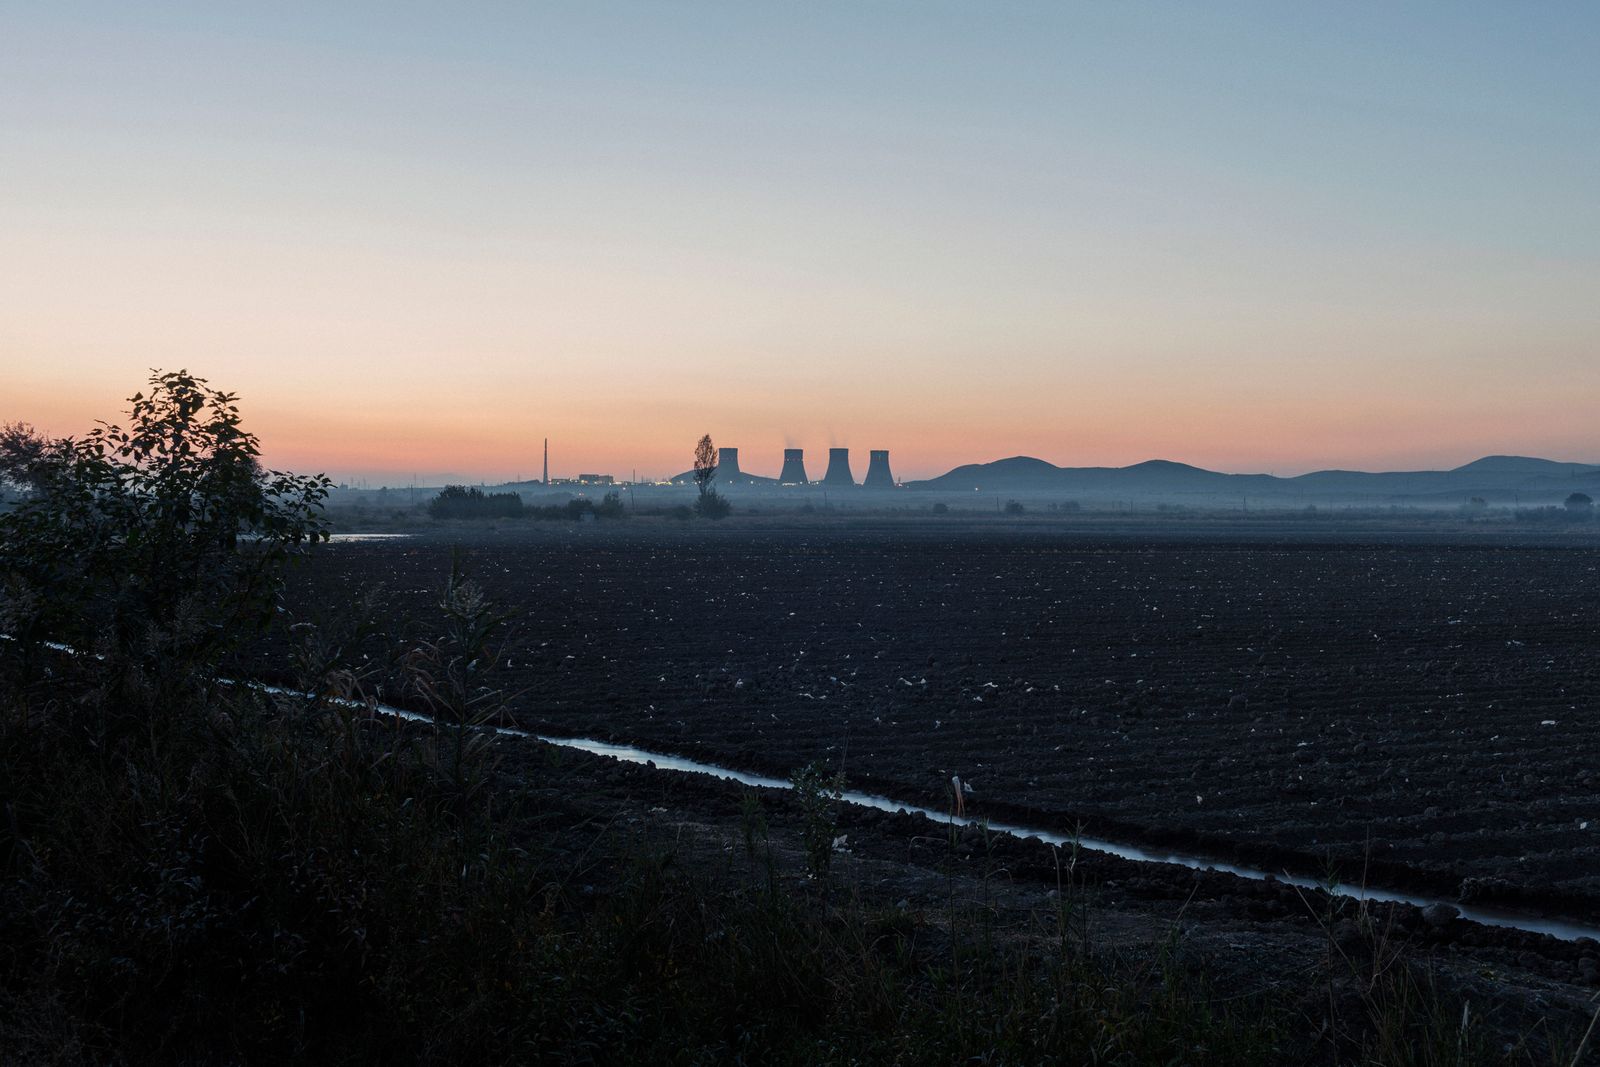 © Stefano Morelli - Arshaluys, Armenia. A view of the Metsamor Nuclear Power Plant from the house of Manvel and Ruzan.